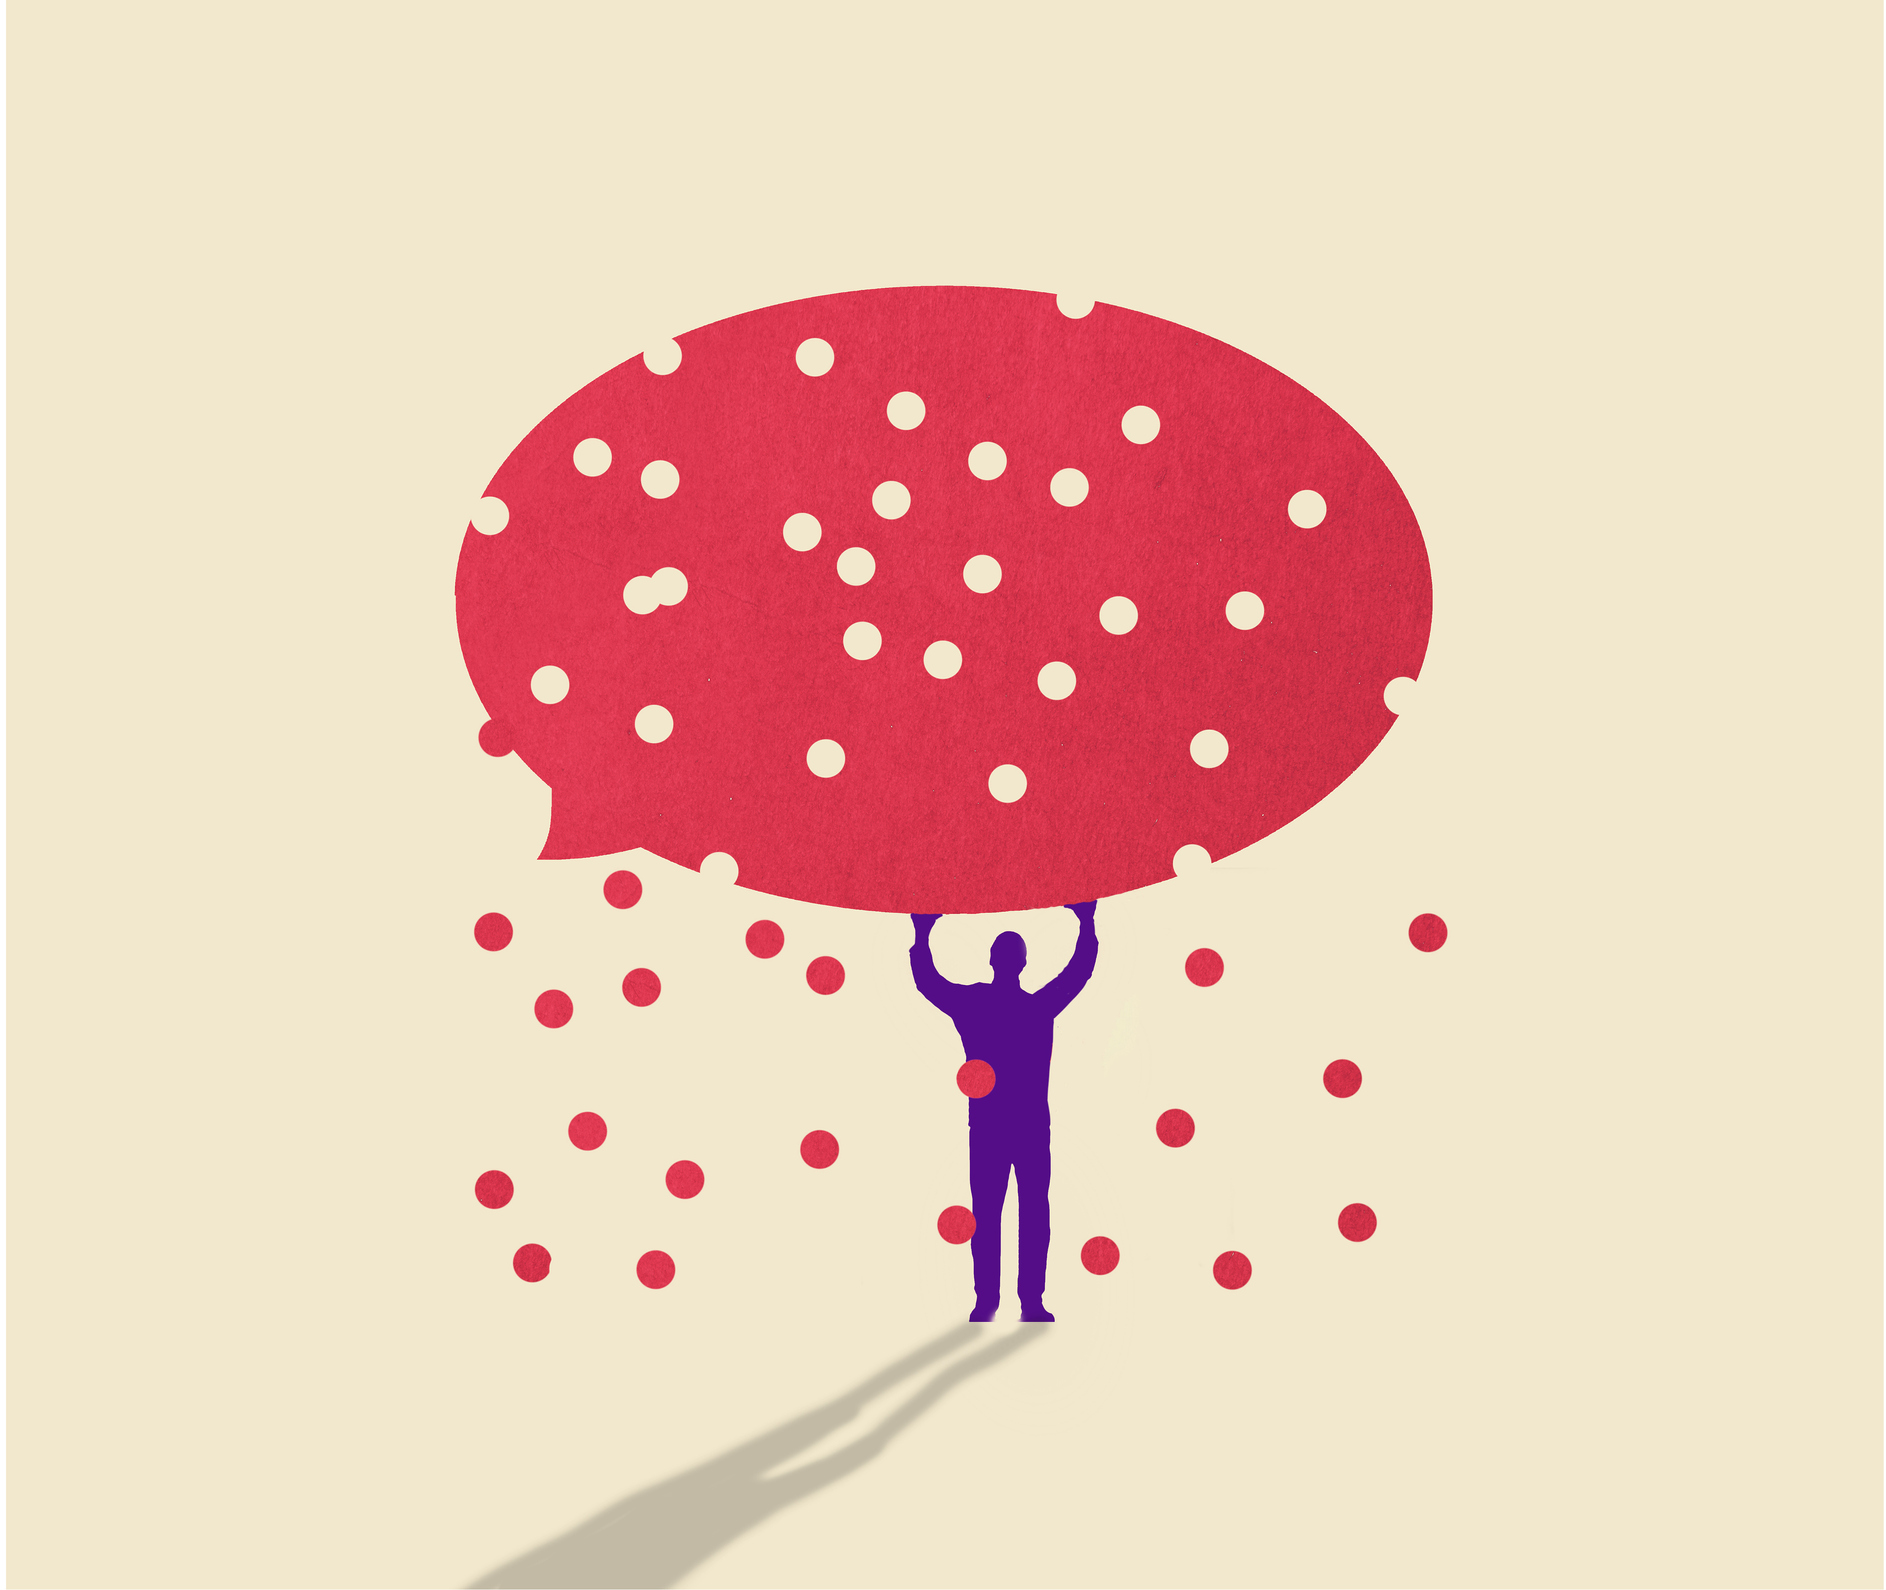 An illustration of a man seen in blue silhouette holding over his head a large red speech bubble, which is punched with holes.